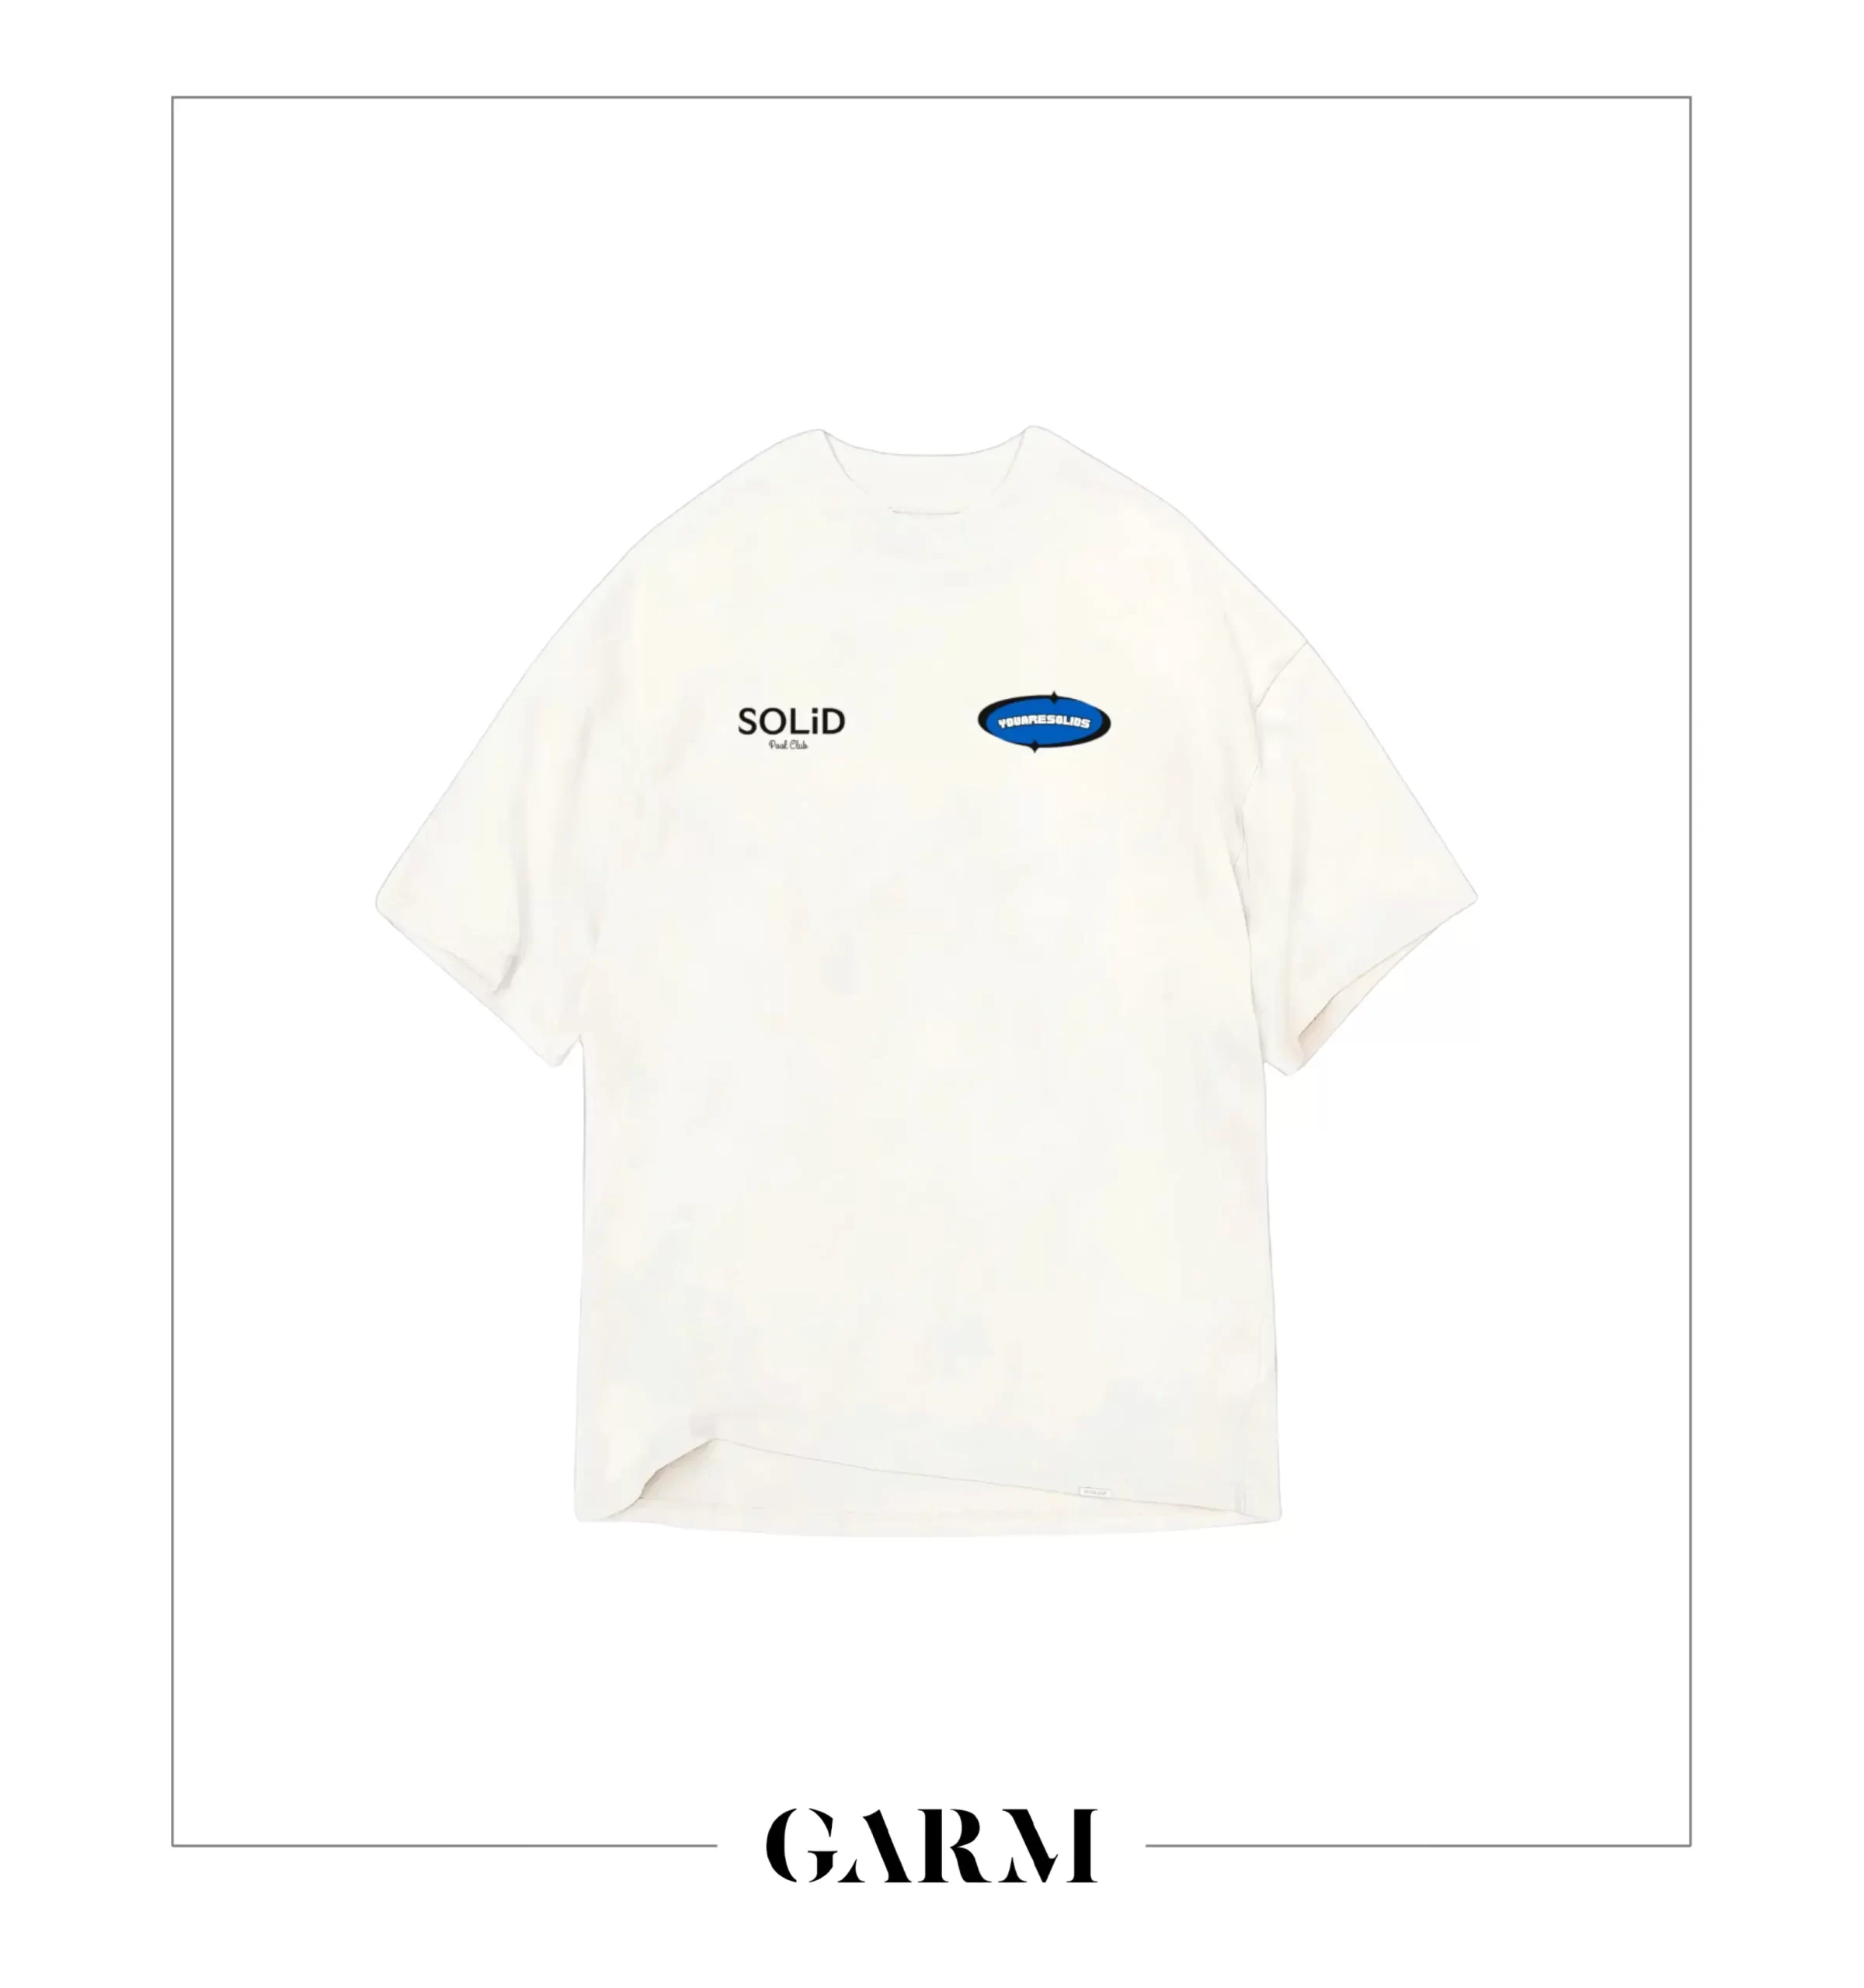 SOLiD POOL CLUB T-SHIRT available on Garm